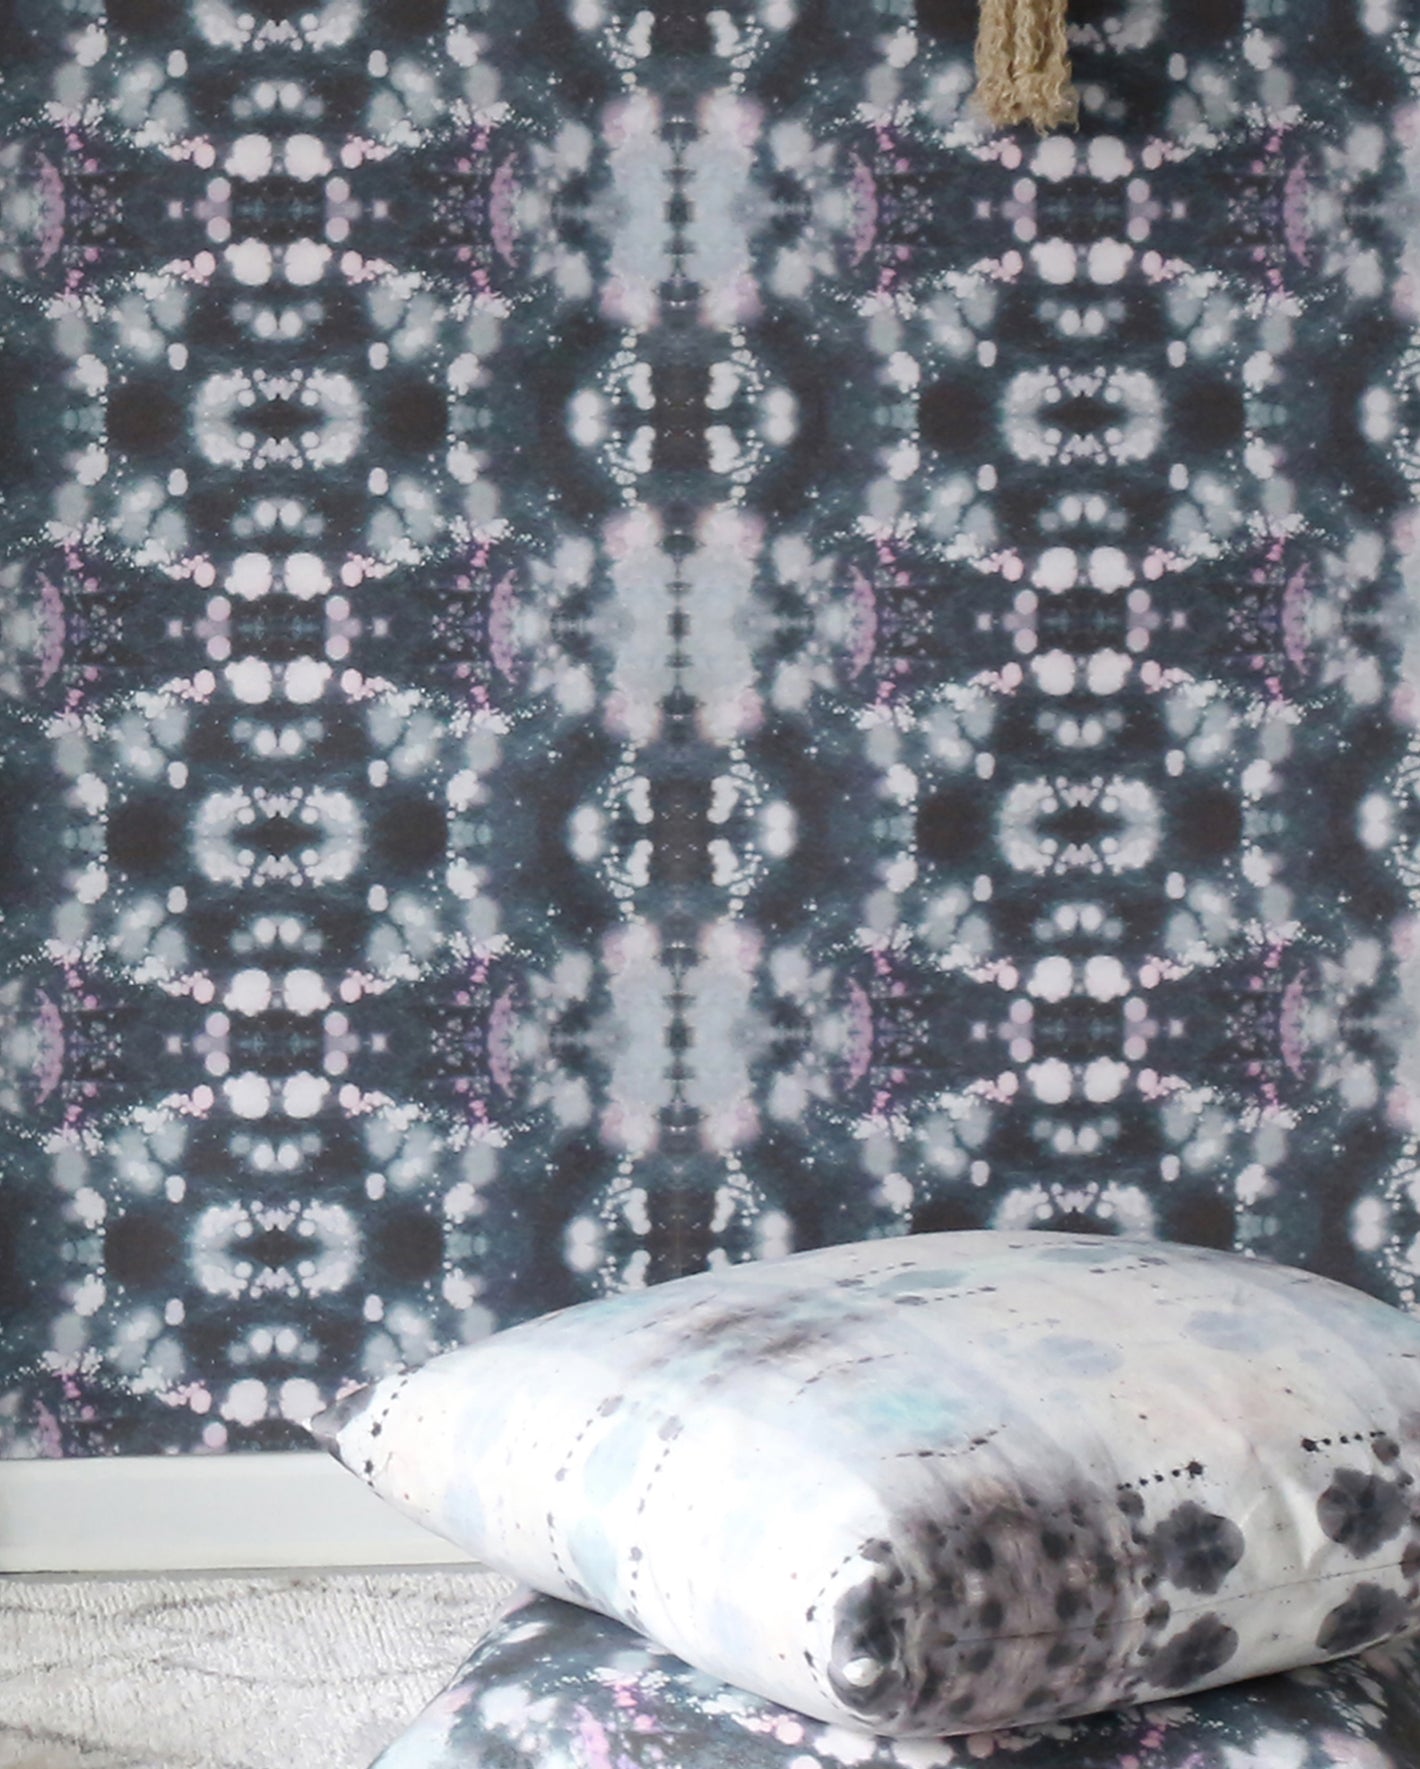 A room with a black and white tie dye wallpaper